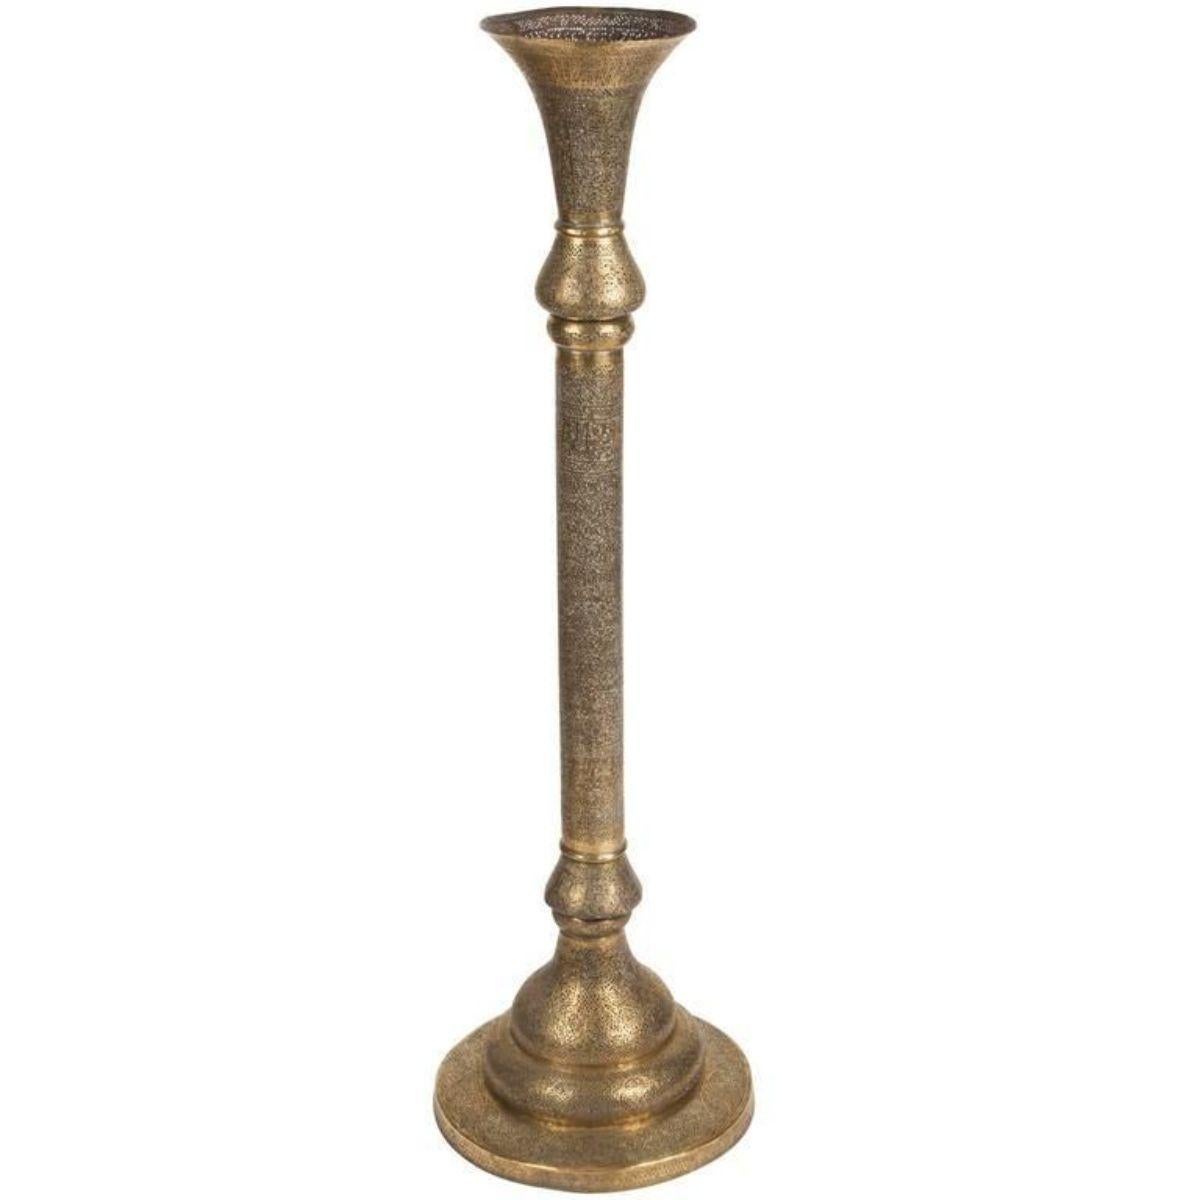 Mid-19th Century, Antique Islamic Brass Candleholder Floor Lamp For Sale 4